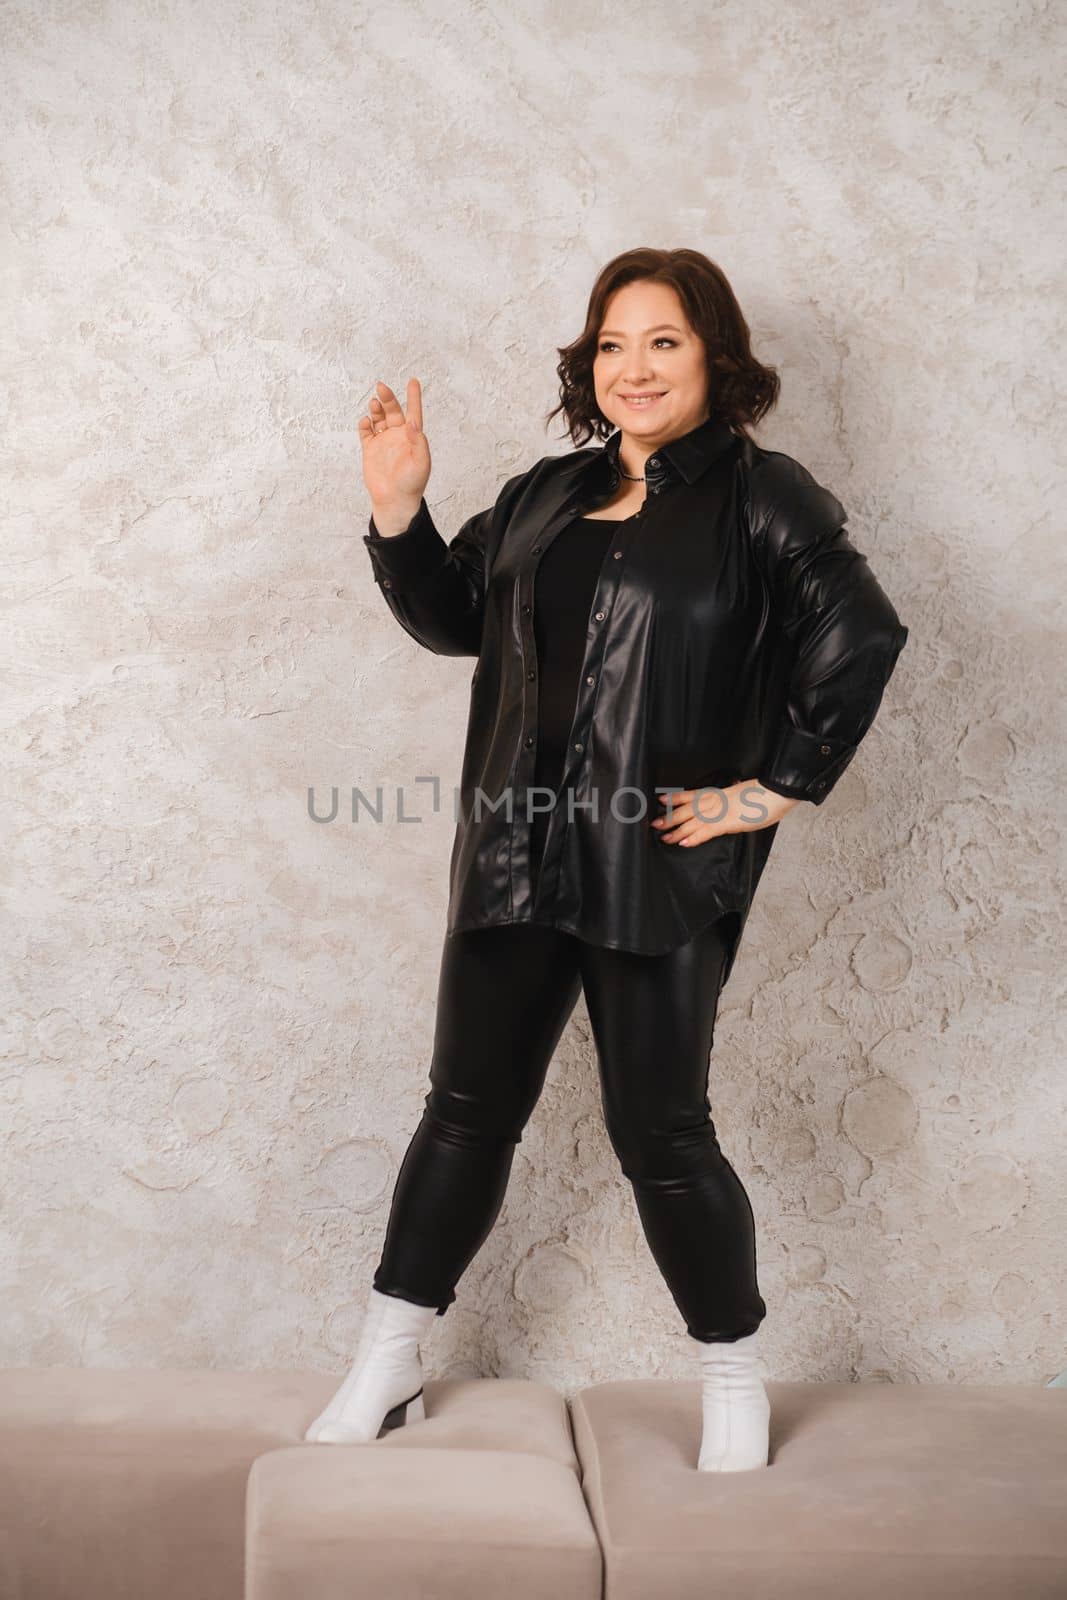 An adult woman in black leather clothes poses against a gray studio wall.